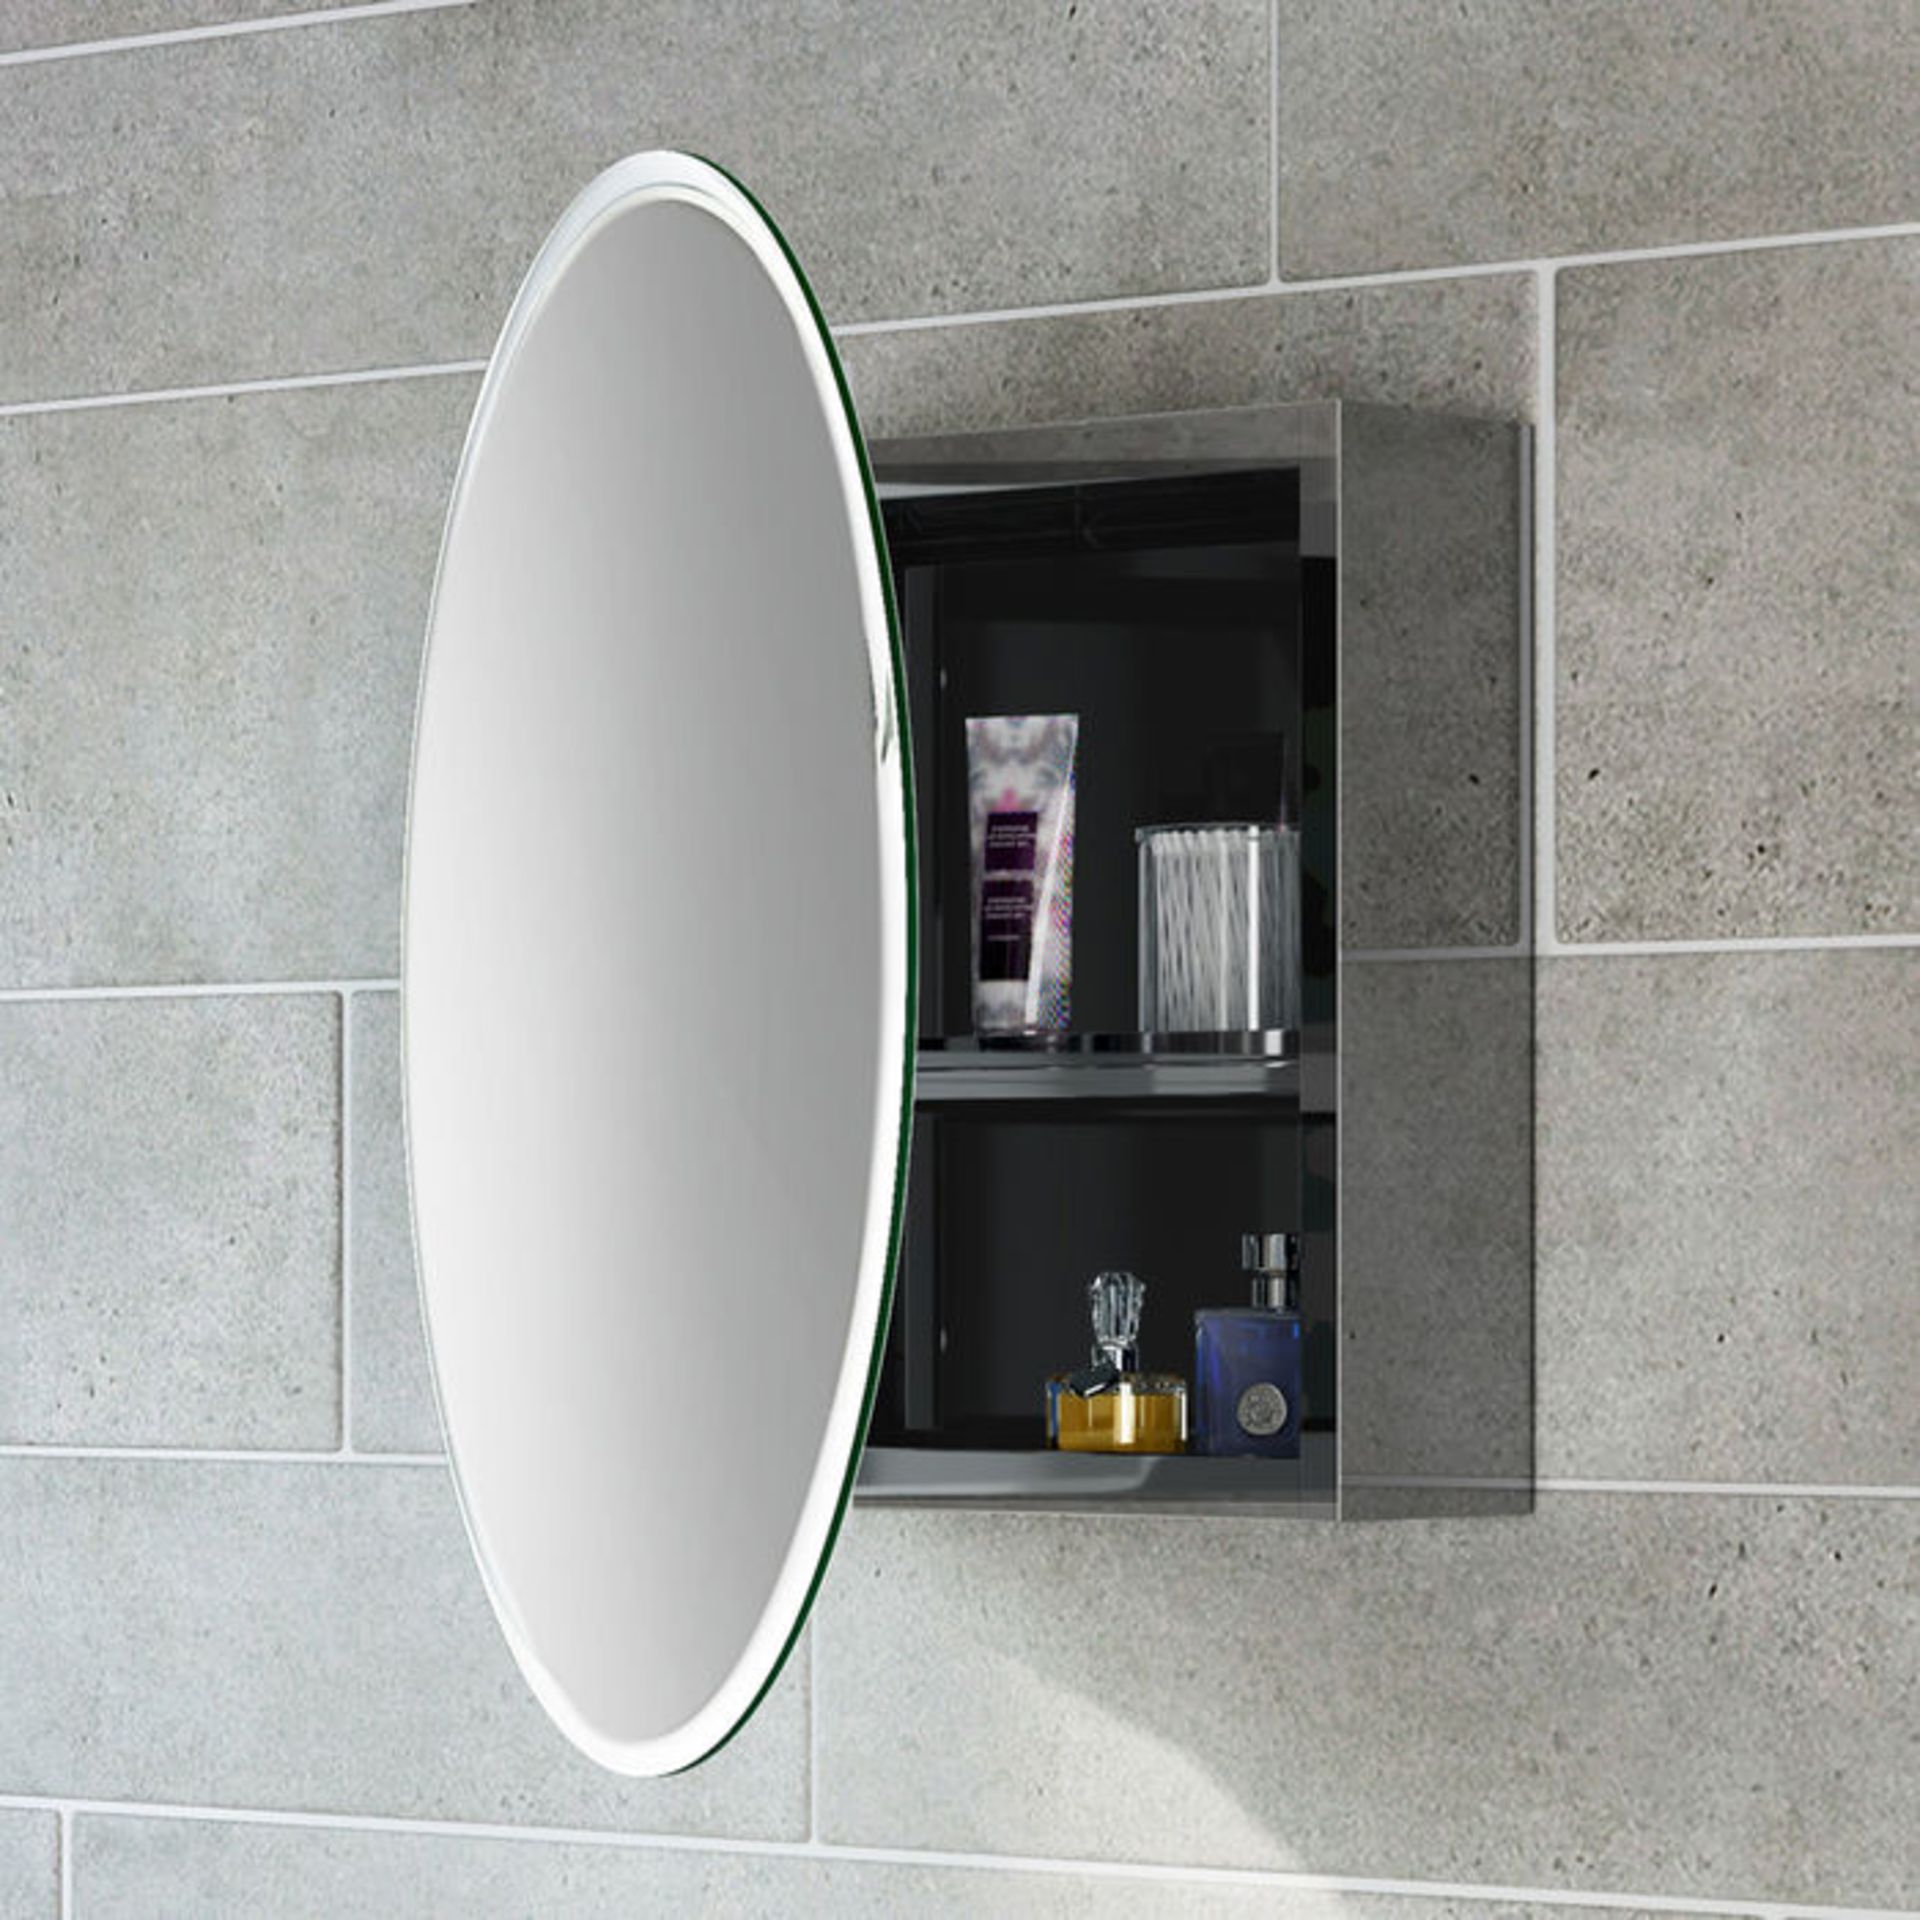 (P283) 500x500mm Round Liberty Stainless Steel Mirror Cabinet.. Made from high-grade stainless steel